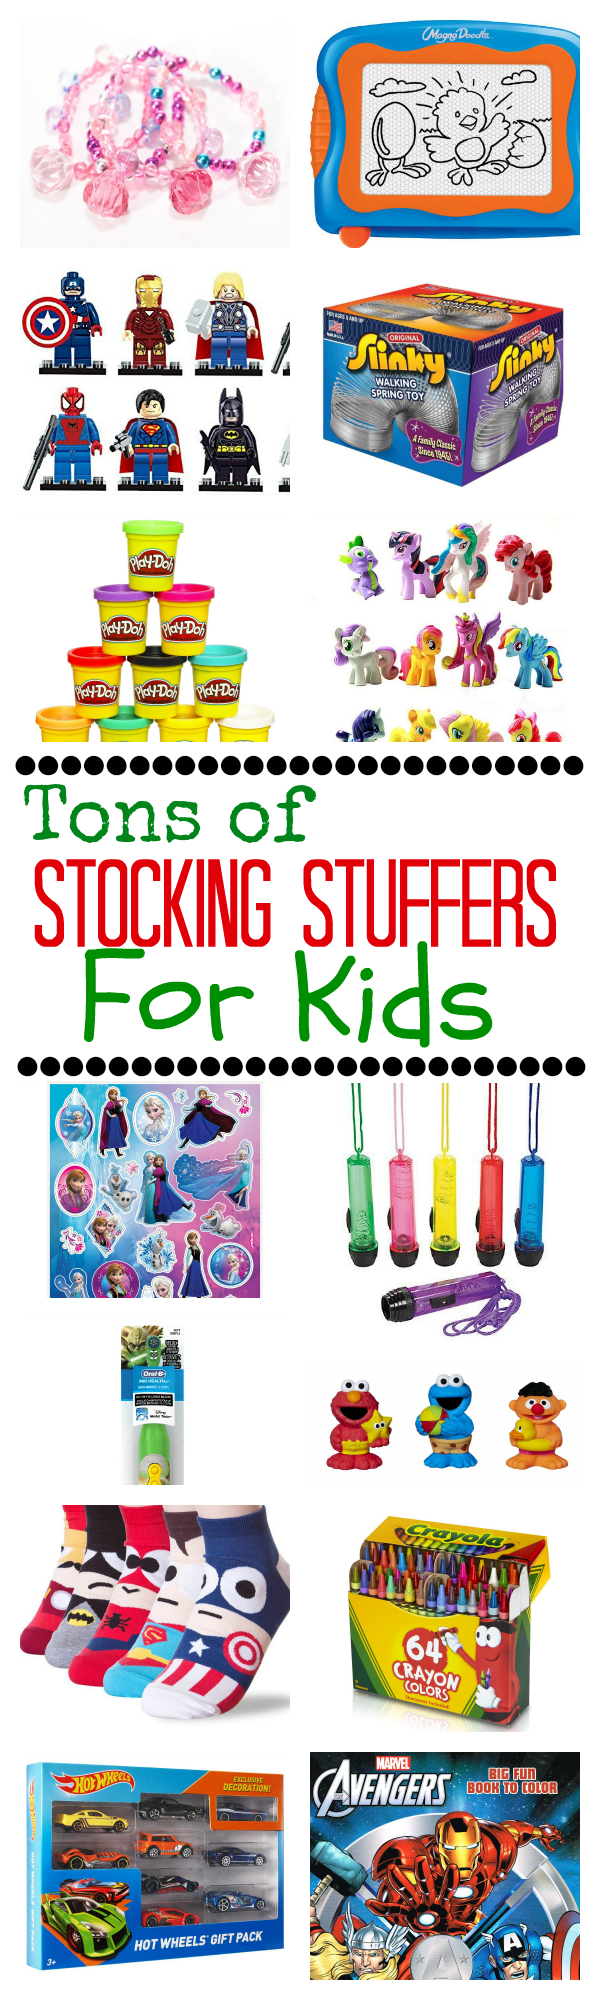 A Whole Bunch of Stocking Stuffer Ideas for Kids